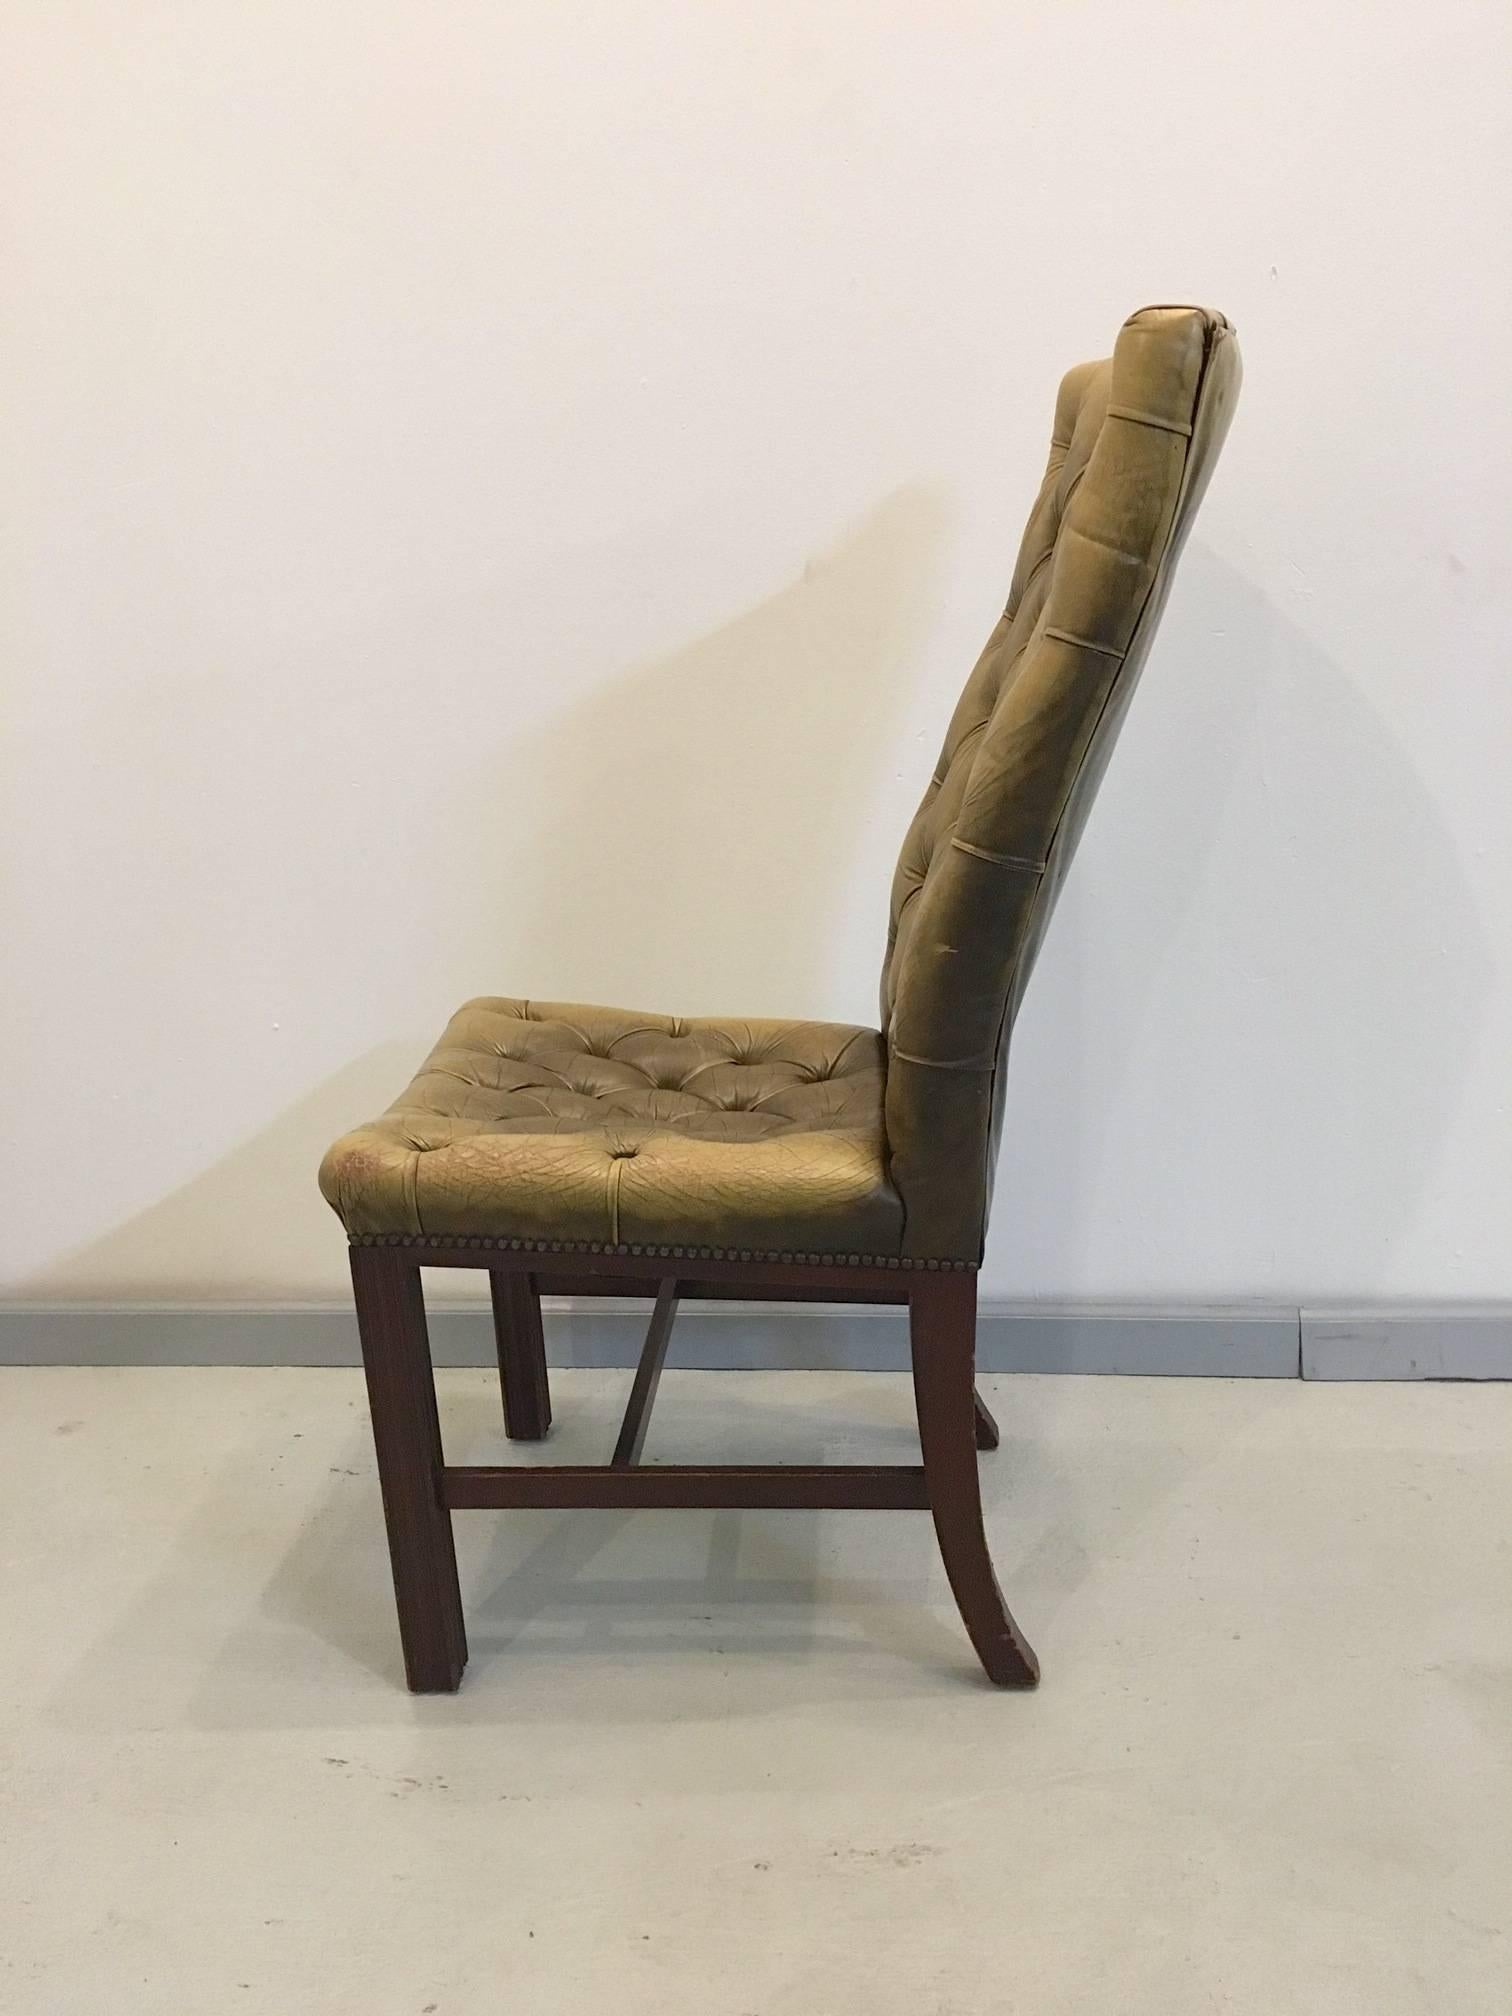 Four tufted high back chairs in leather with beautiful patina. Solid wood legs, buttoning throughout seat and back, fully upholstered around the back.

Item is in our New Hampshire warehouse and not available for viewing.
 